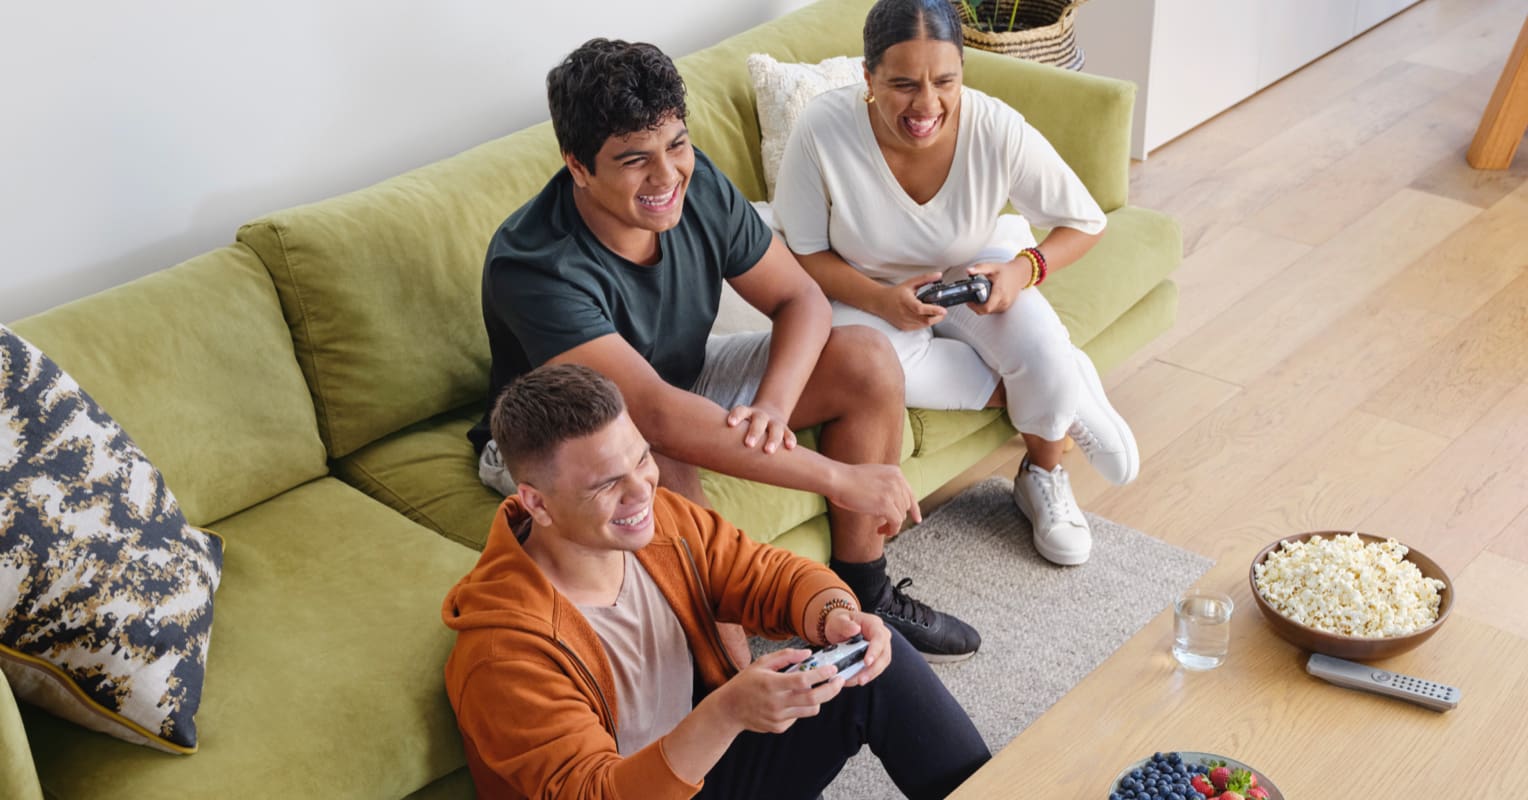 Friends sitting on a couch playing video games